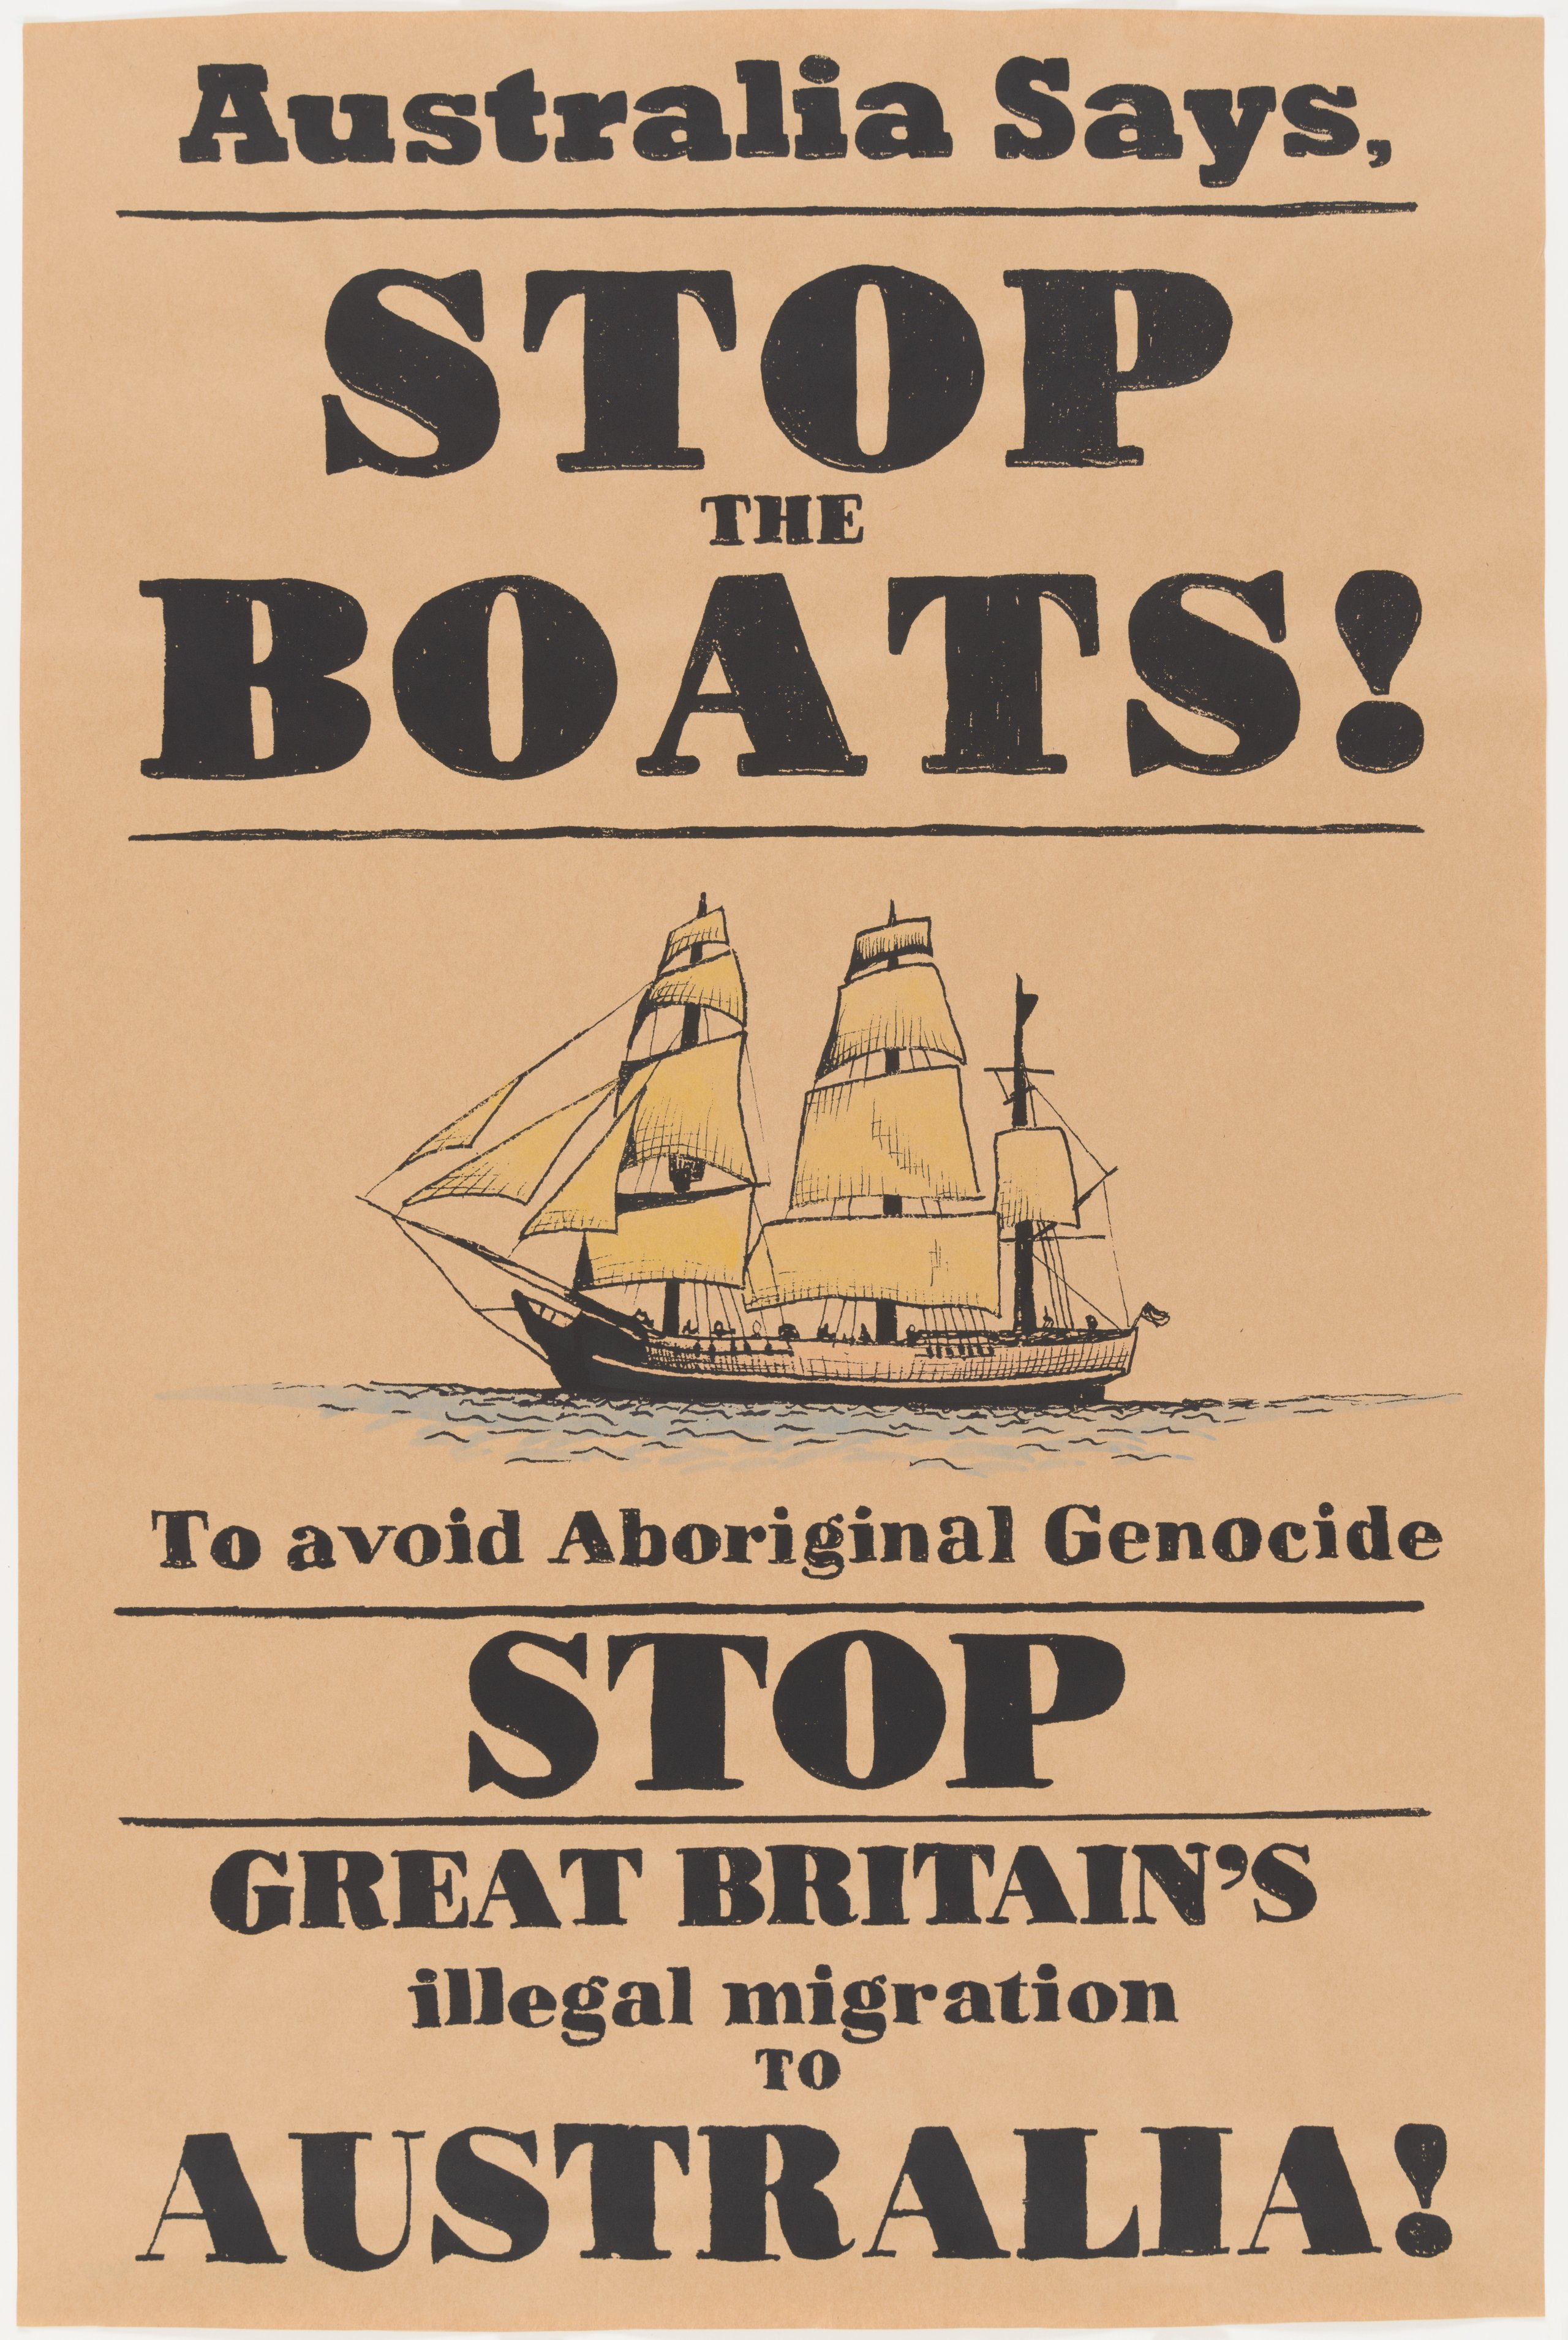 Poster, 'STOP the BOATS', designed by Peter Drew